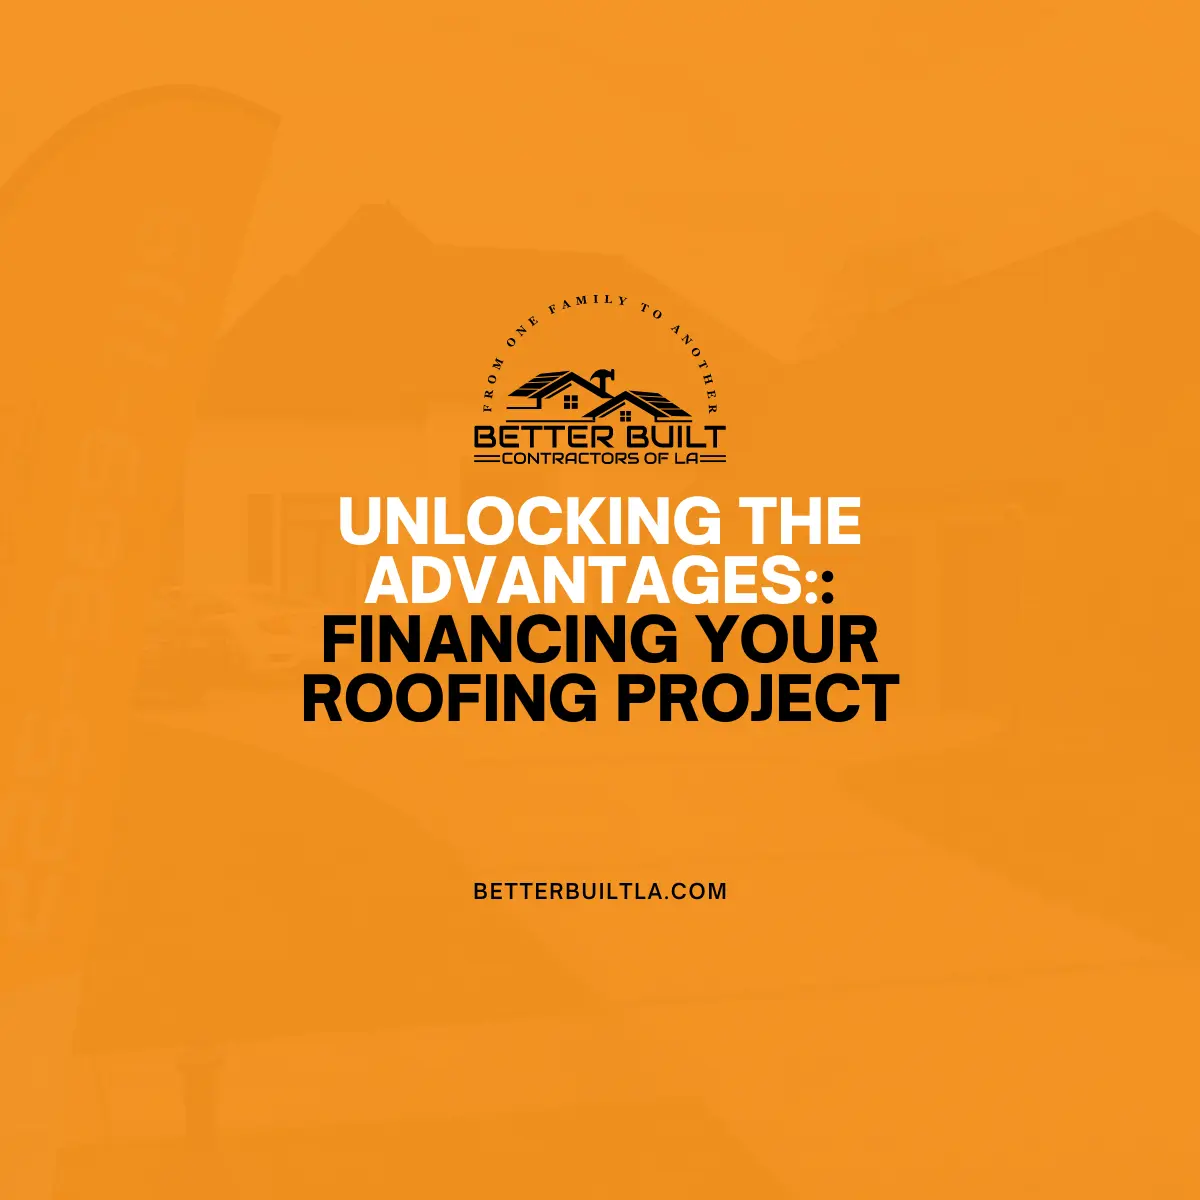 Unlocking the Advantages: Financing Your Roofing Project